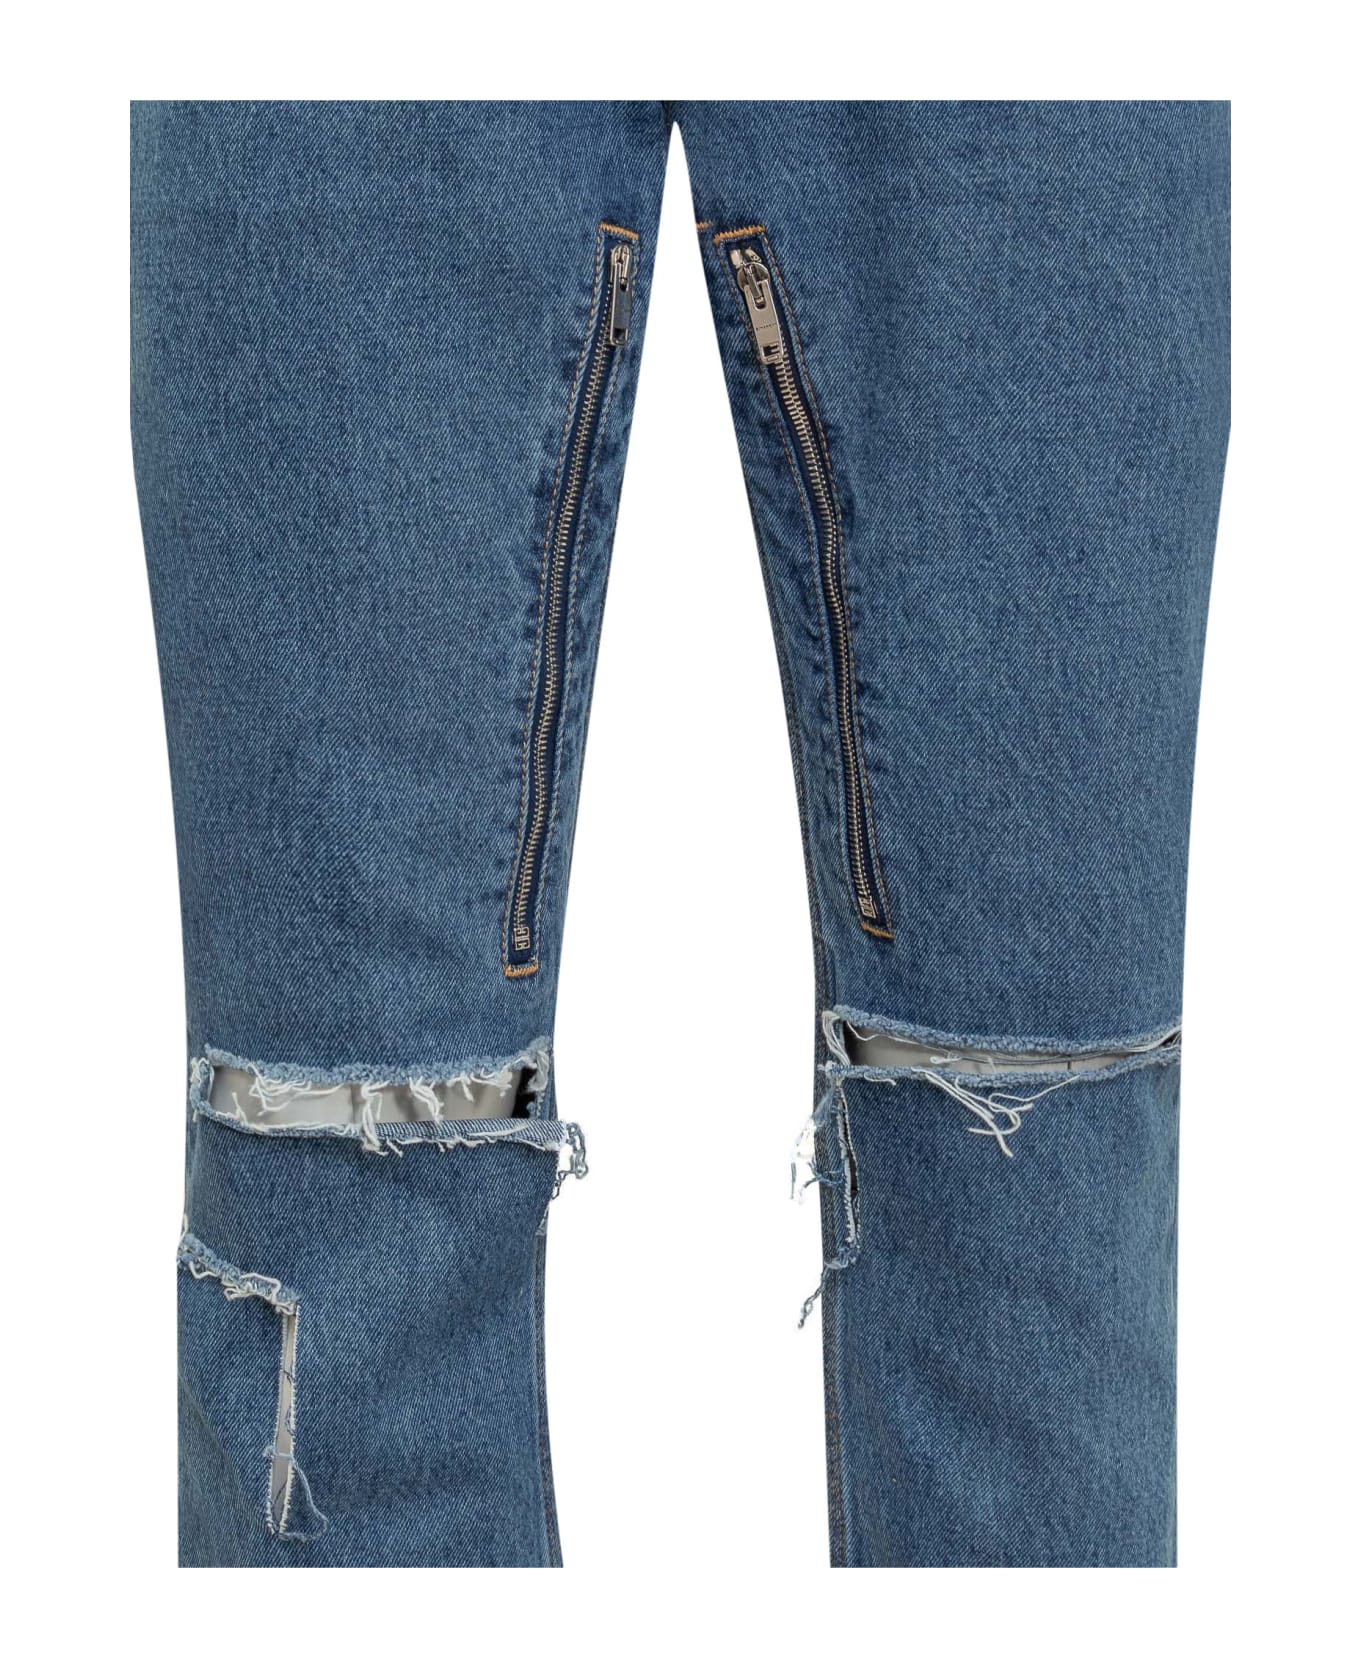 Givenchy Jeans With Zip And Rips Details - INDIGO BLUE デニム